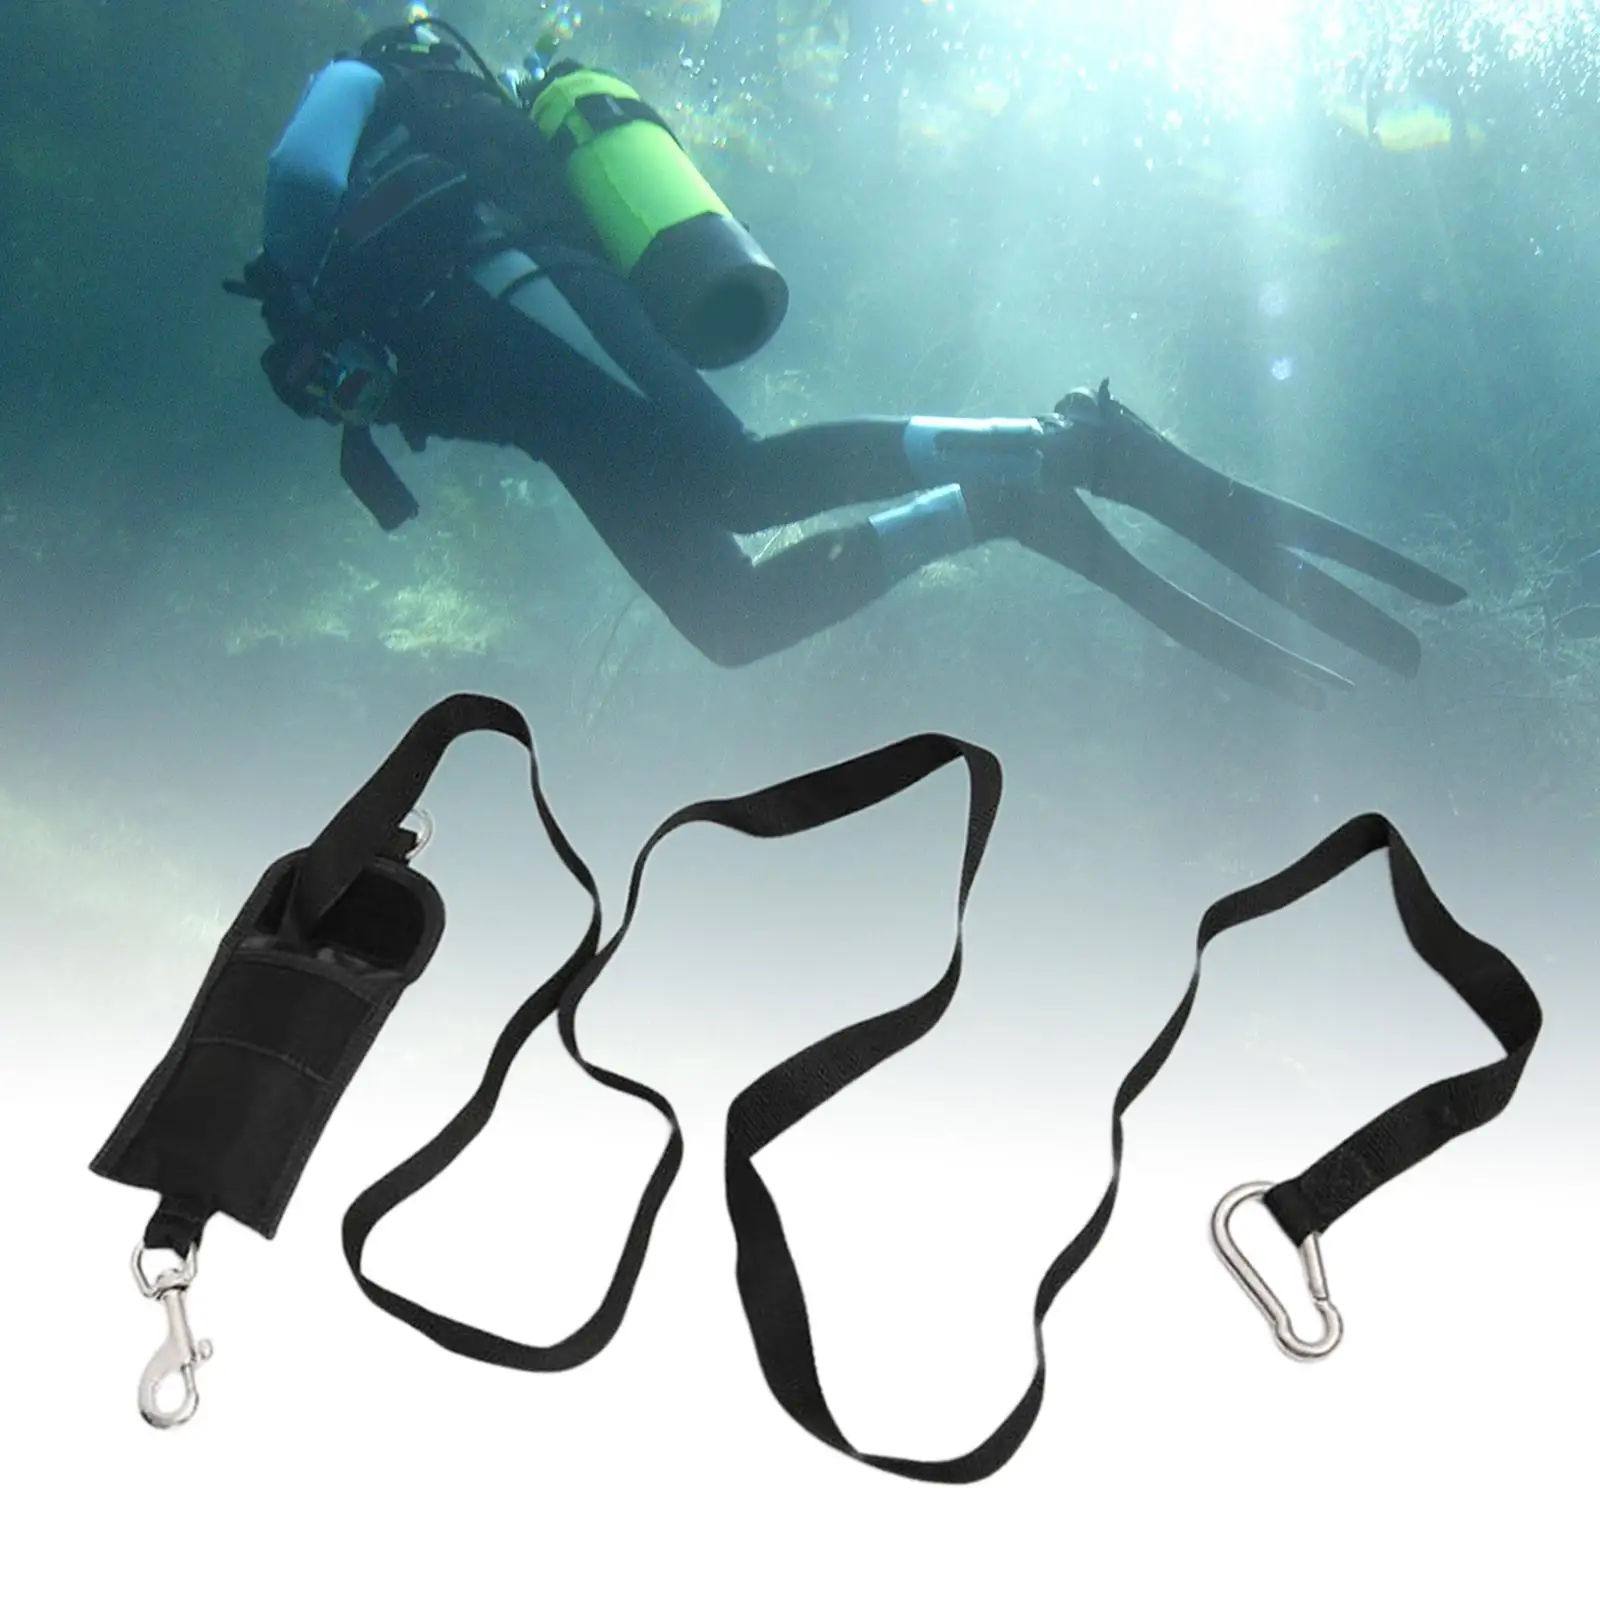 Scuba Diving Buddy Line Underwater Freediving Safety Diver Diving Rope